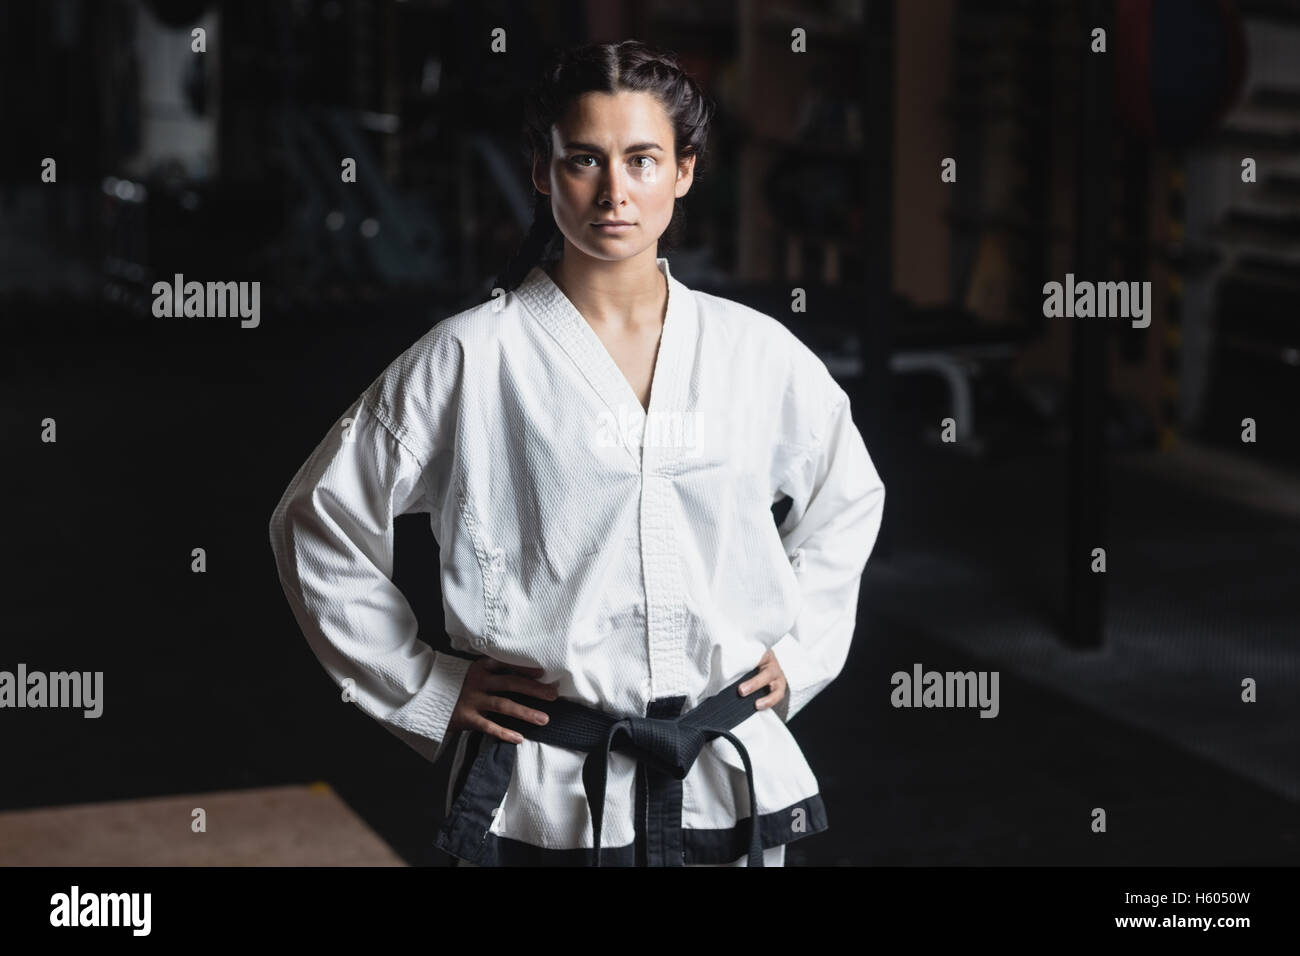 Portrait of karate woman standing with hand on hip Stock Photo